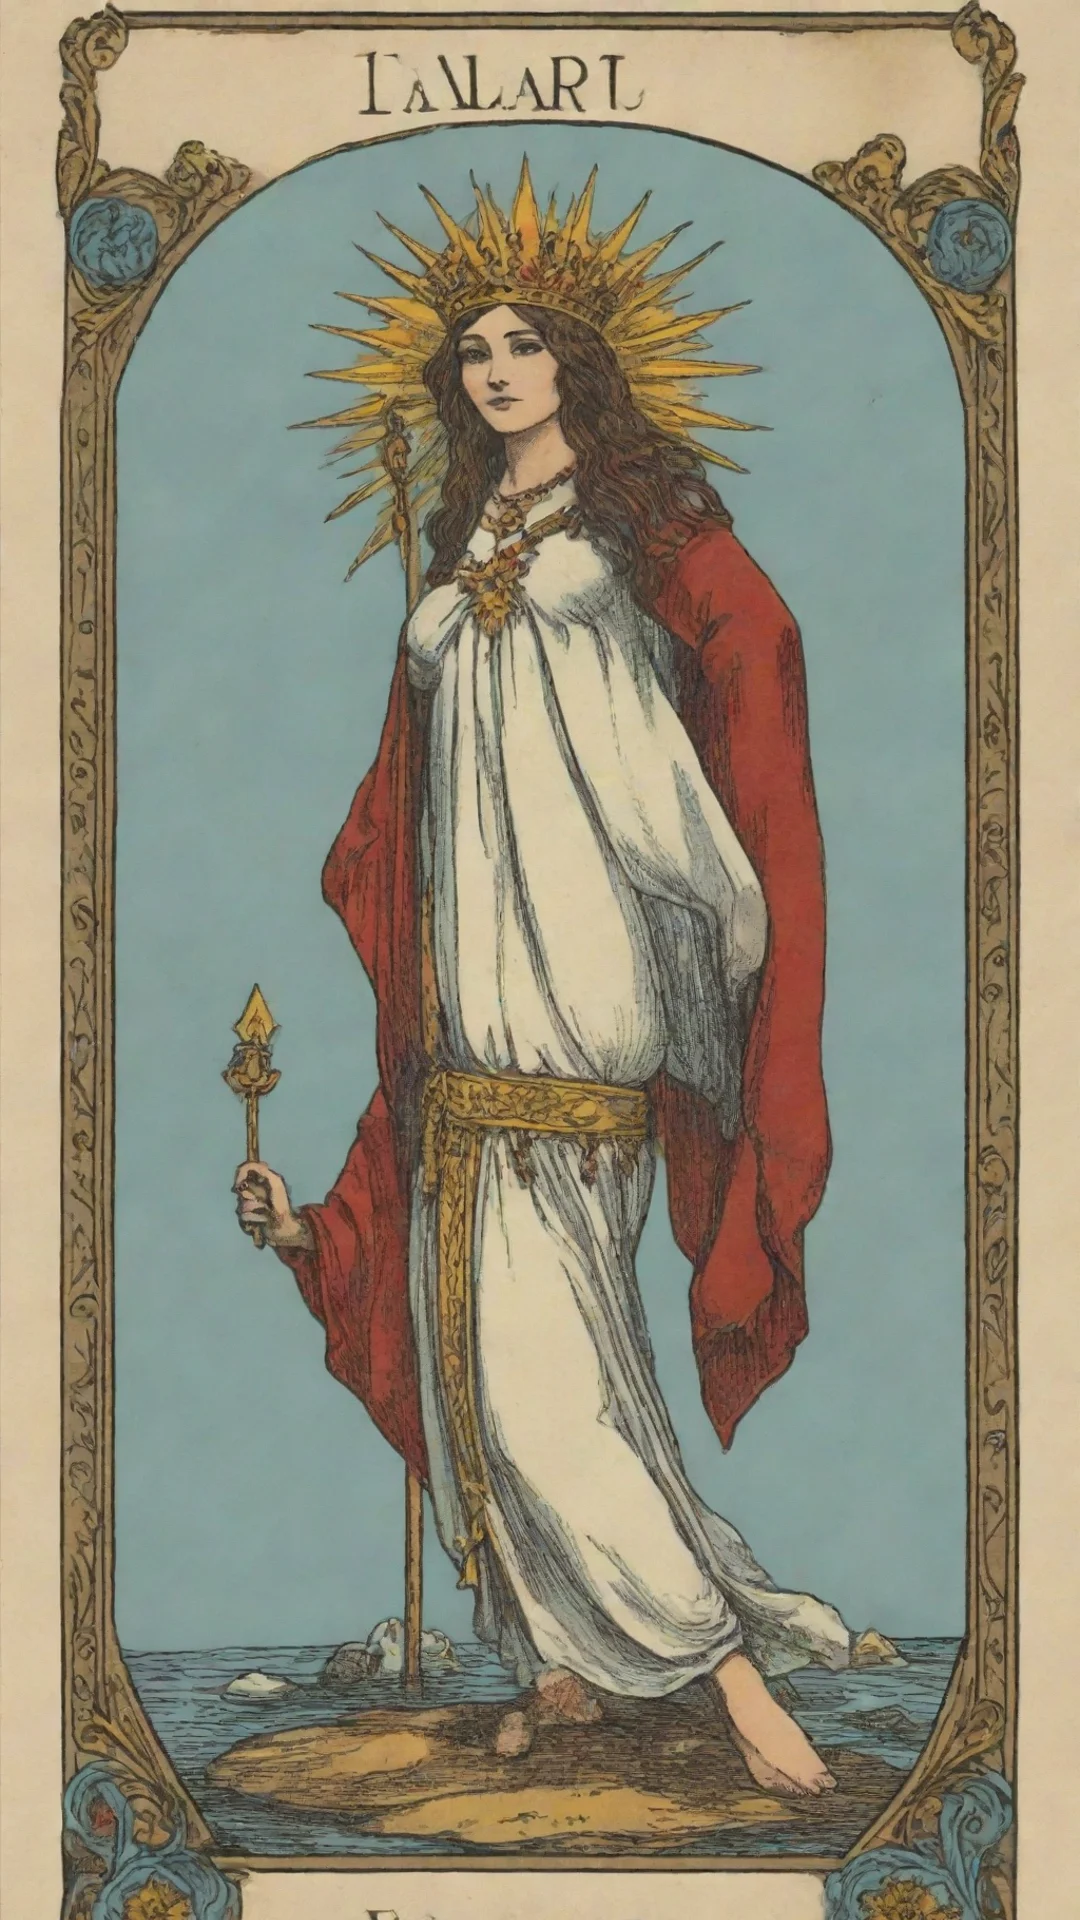 trending generate a tarot card in the marseille style but original as an illustration good looking fantastic 1 tall